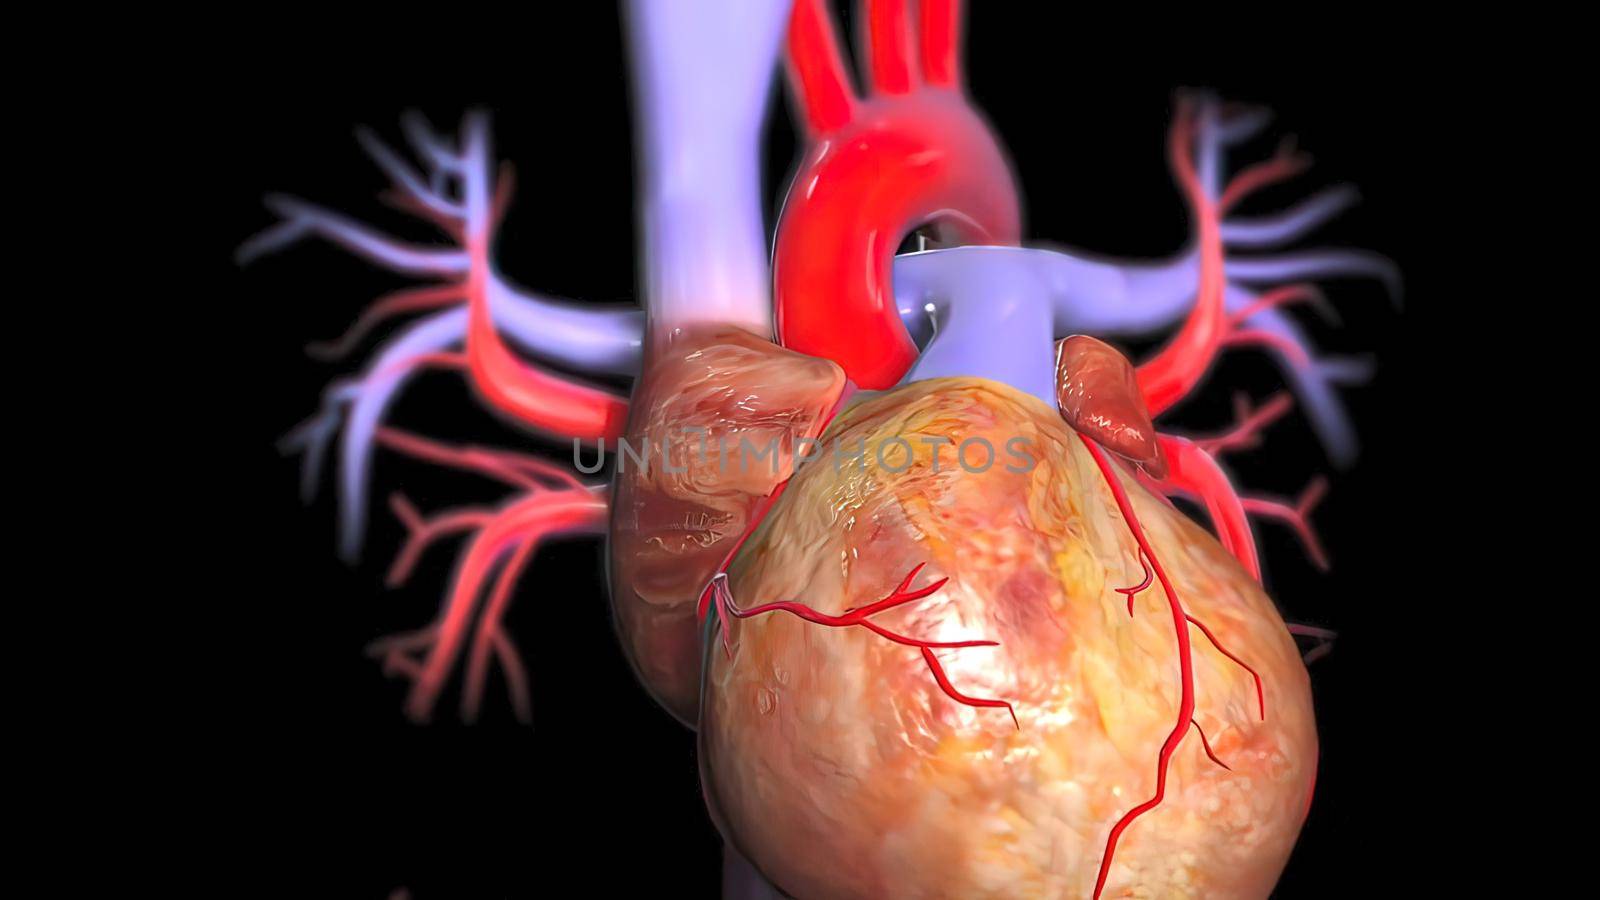 3d illustration of human body heart anatomy by creativepic